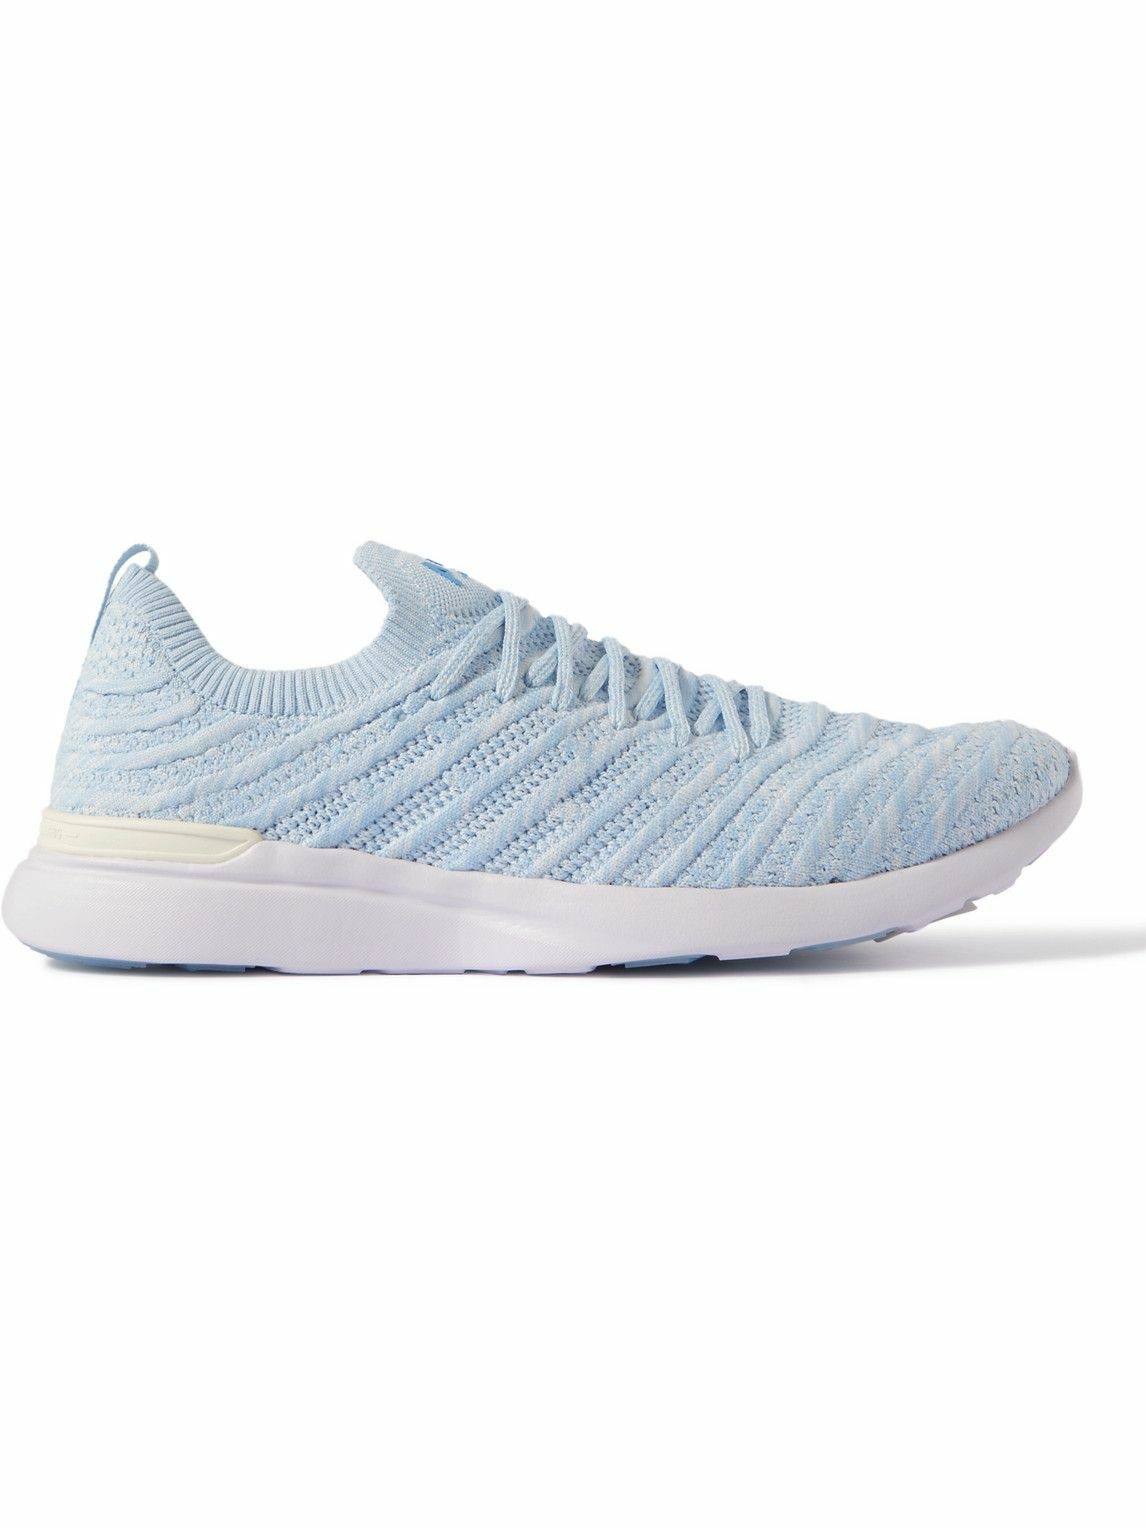 APL: Athletic Propulsion Labs Techloom Wave Sneaker in White